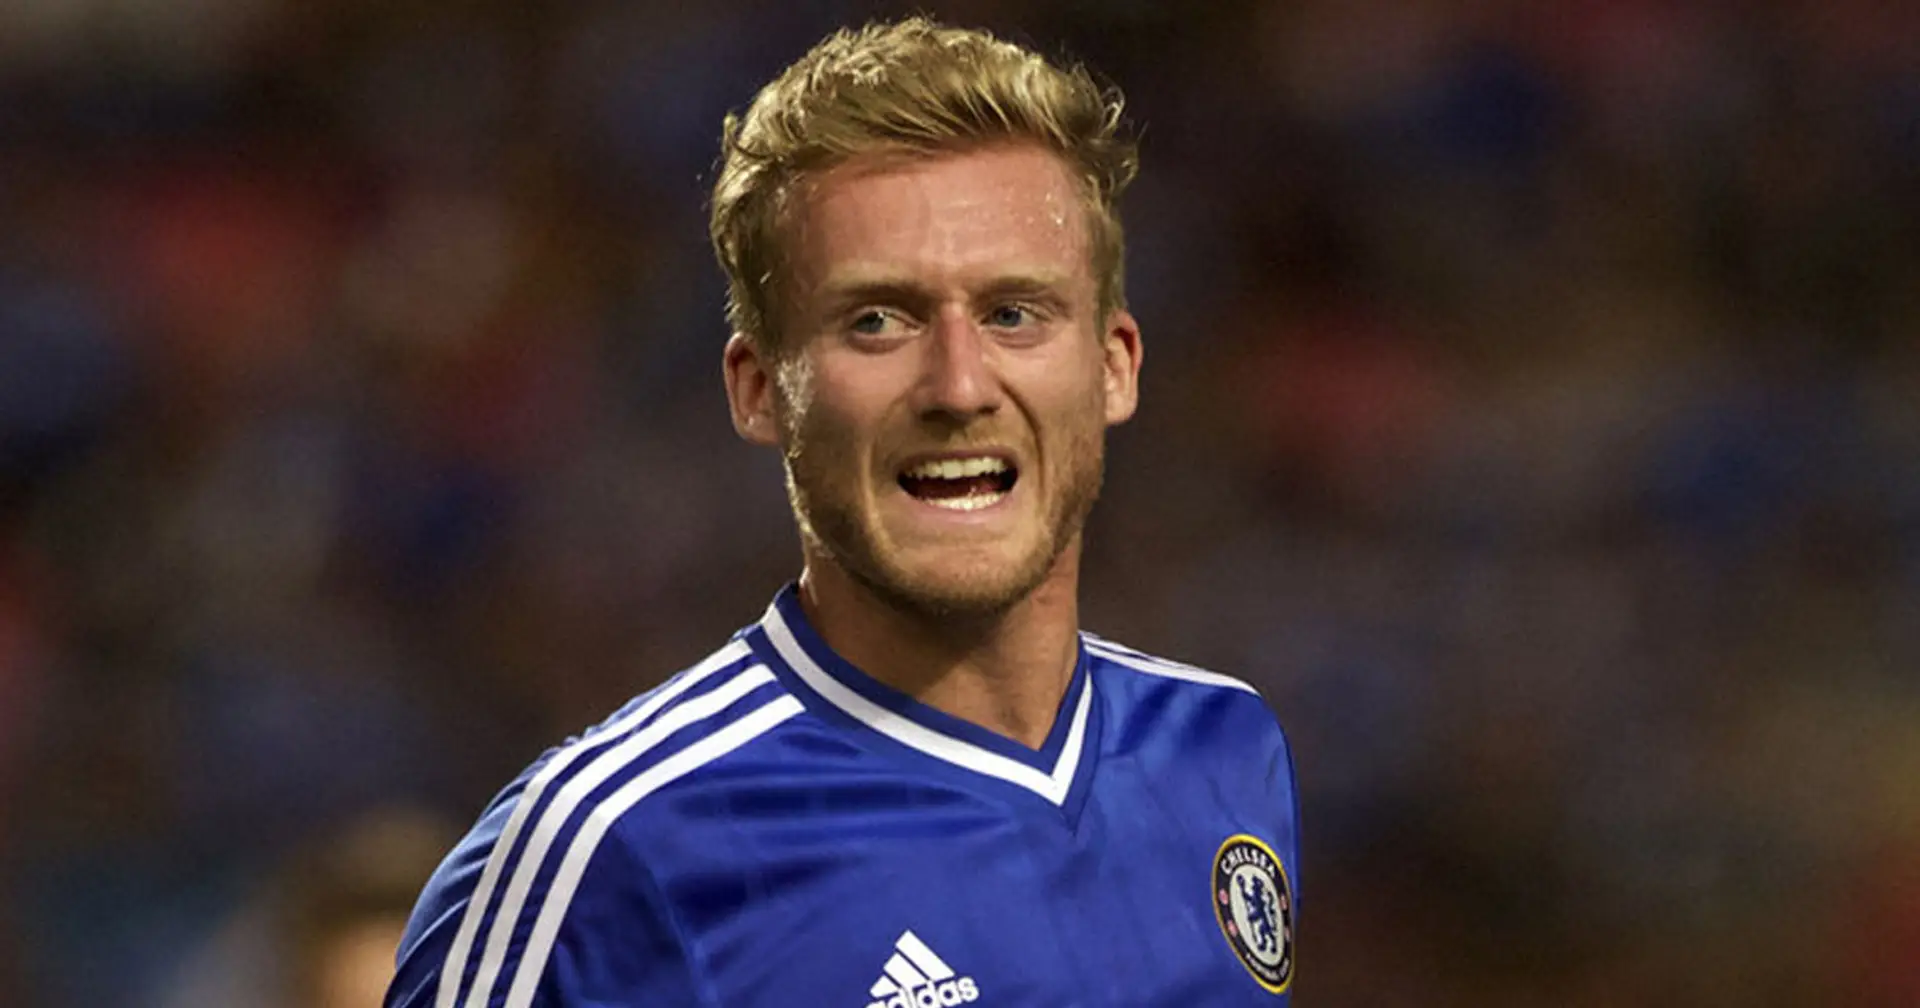 Former Chelsea winger Andre Schurrle explains decision to retire aged just 29: 'The depths became deeper and the highlights less and less'